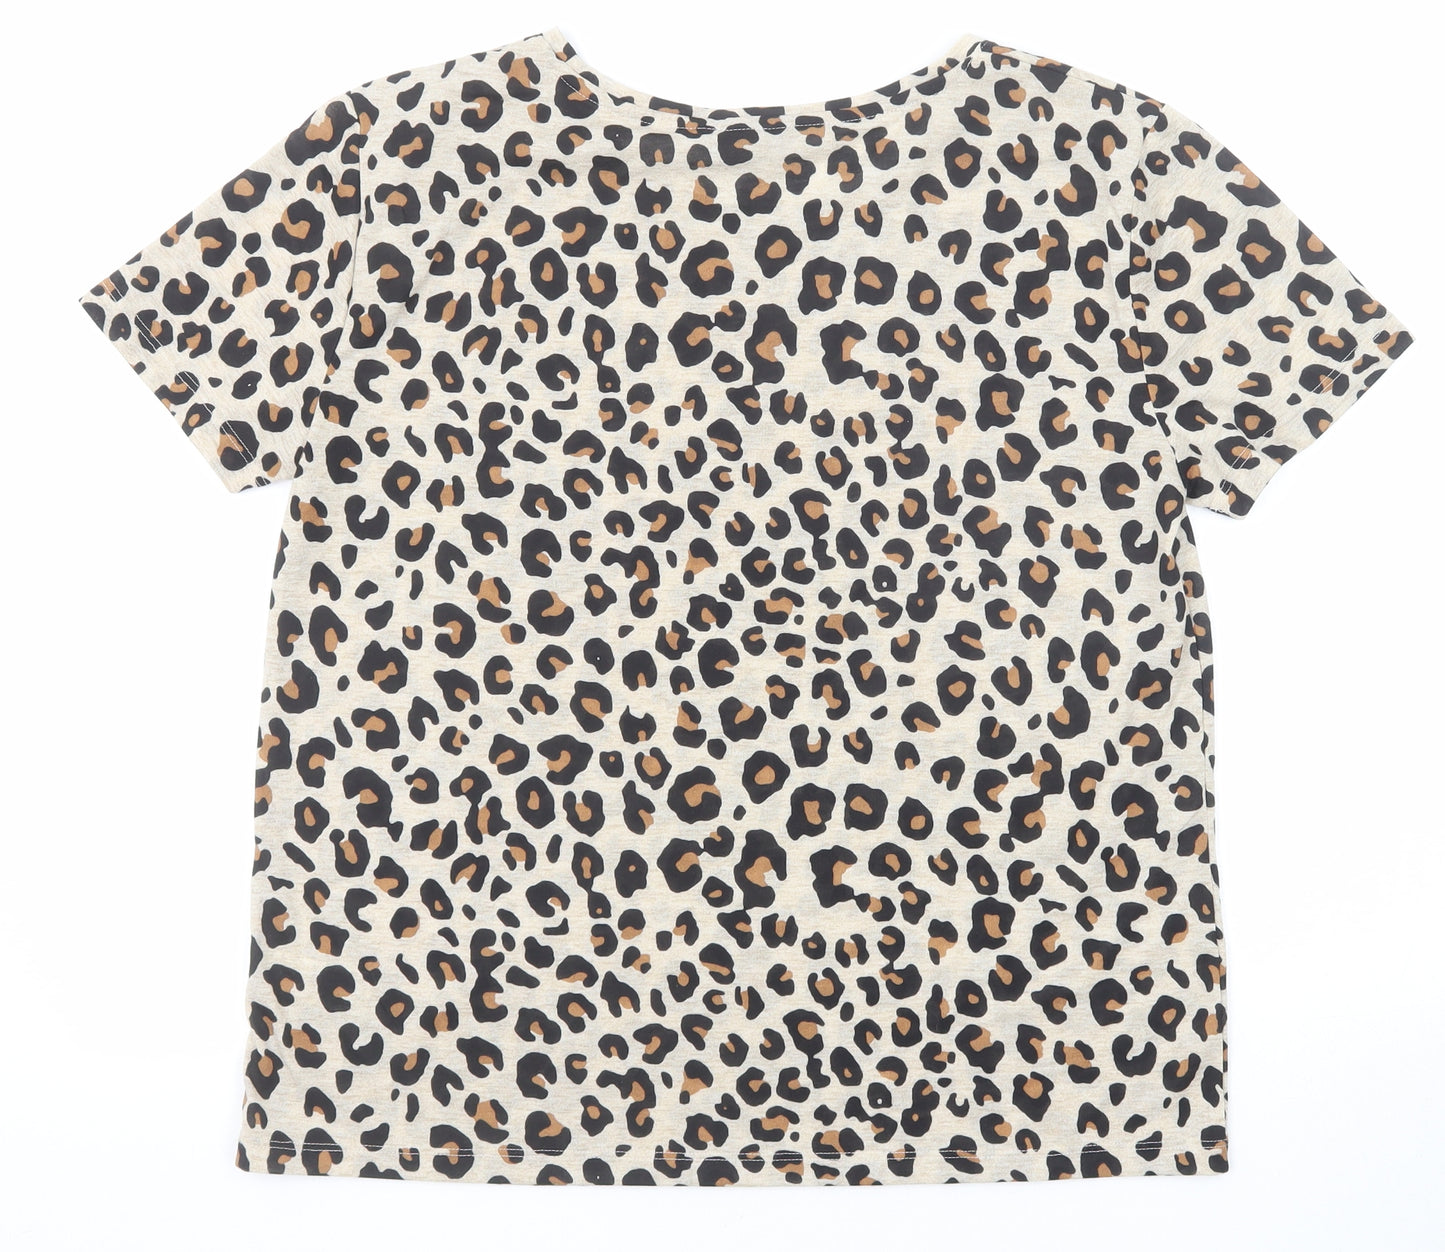 Marks and Spencer Womens Beige Animal Print Polyester Basic T-Shirt Size 10 Round Neck - Leopard Print